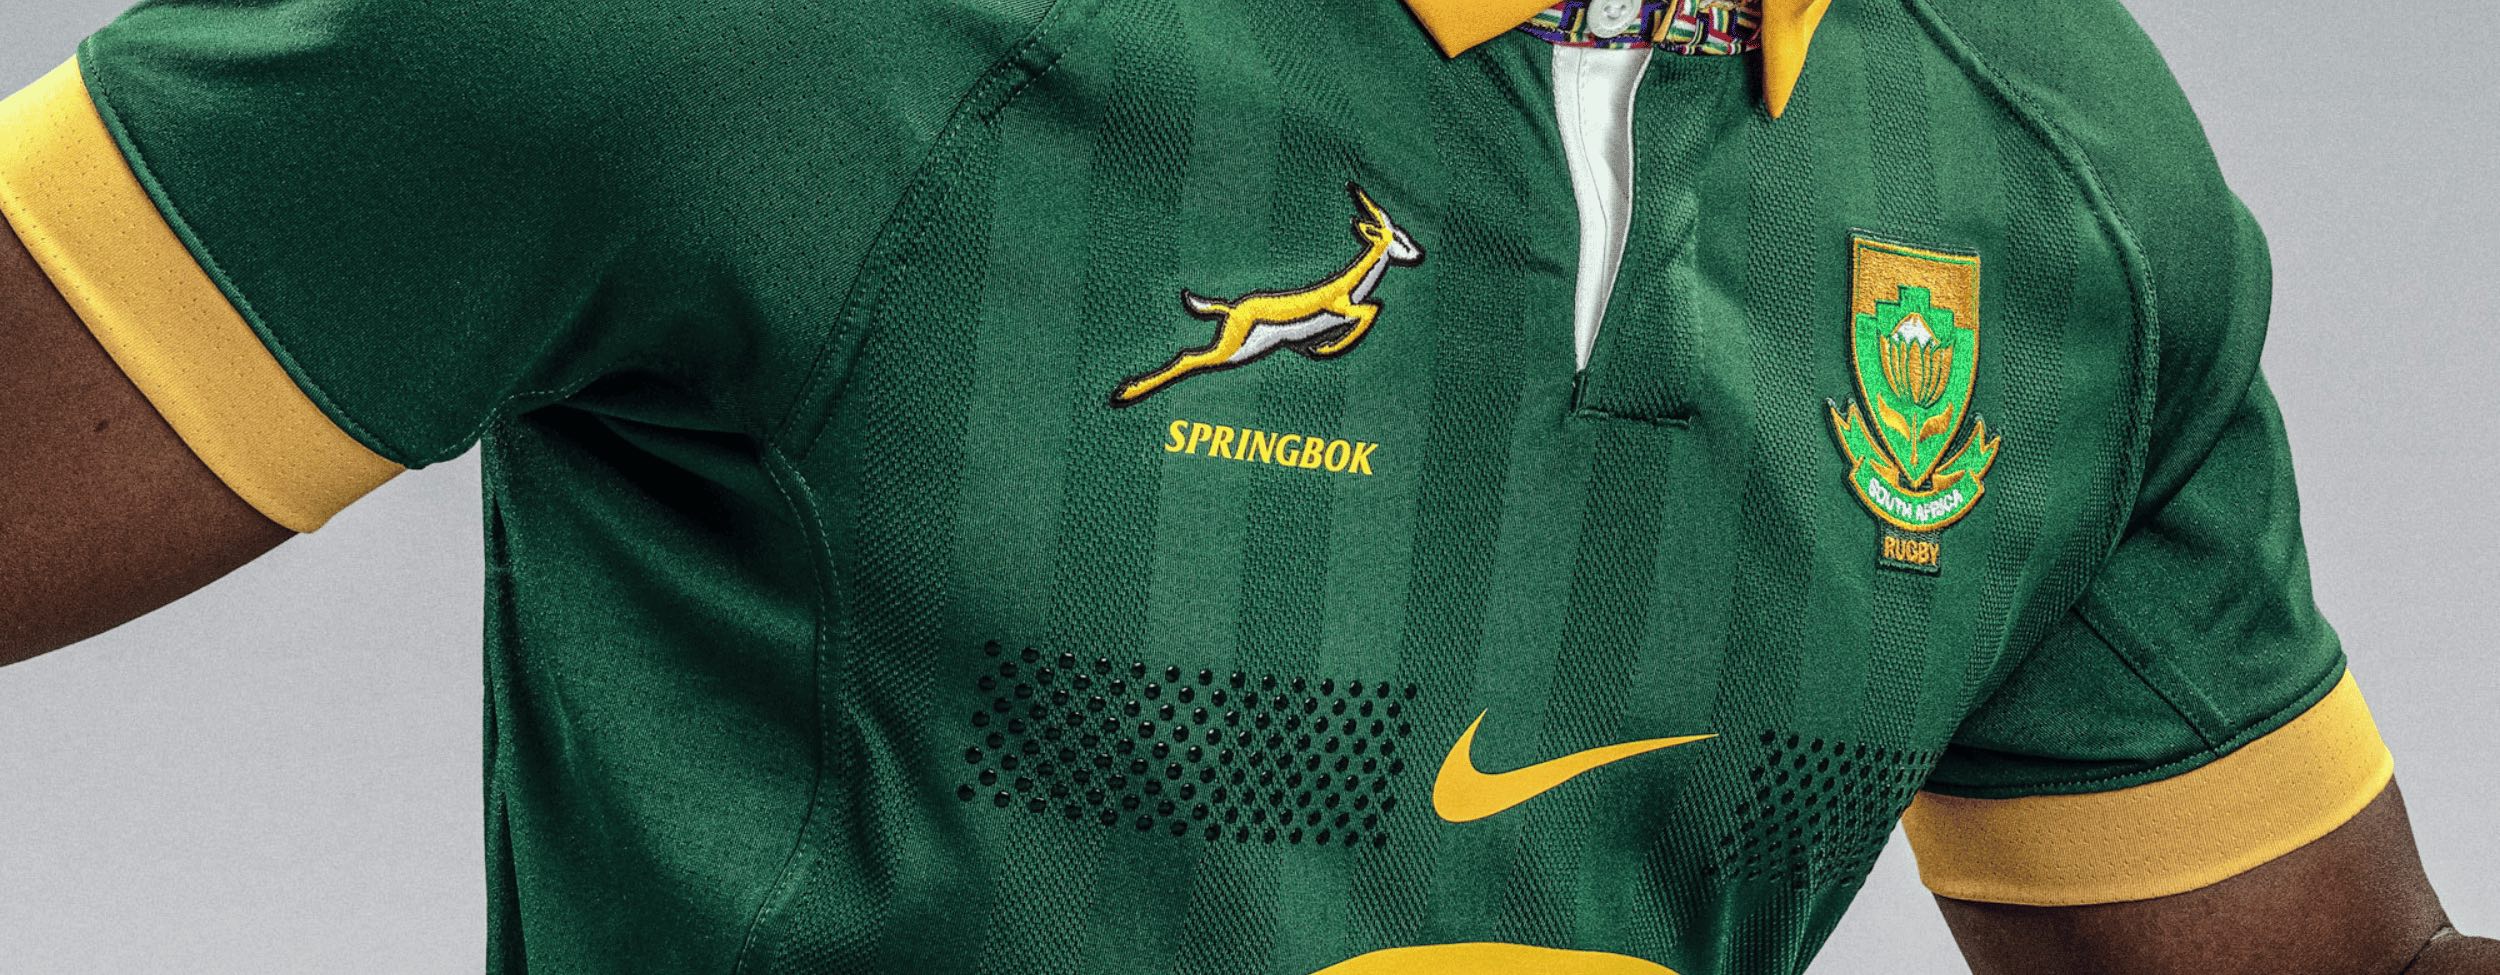 South Africa Rugby Springboks